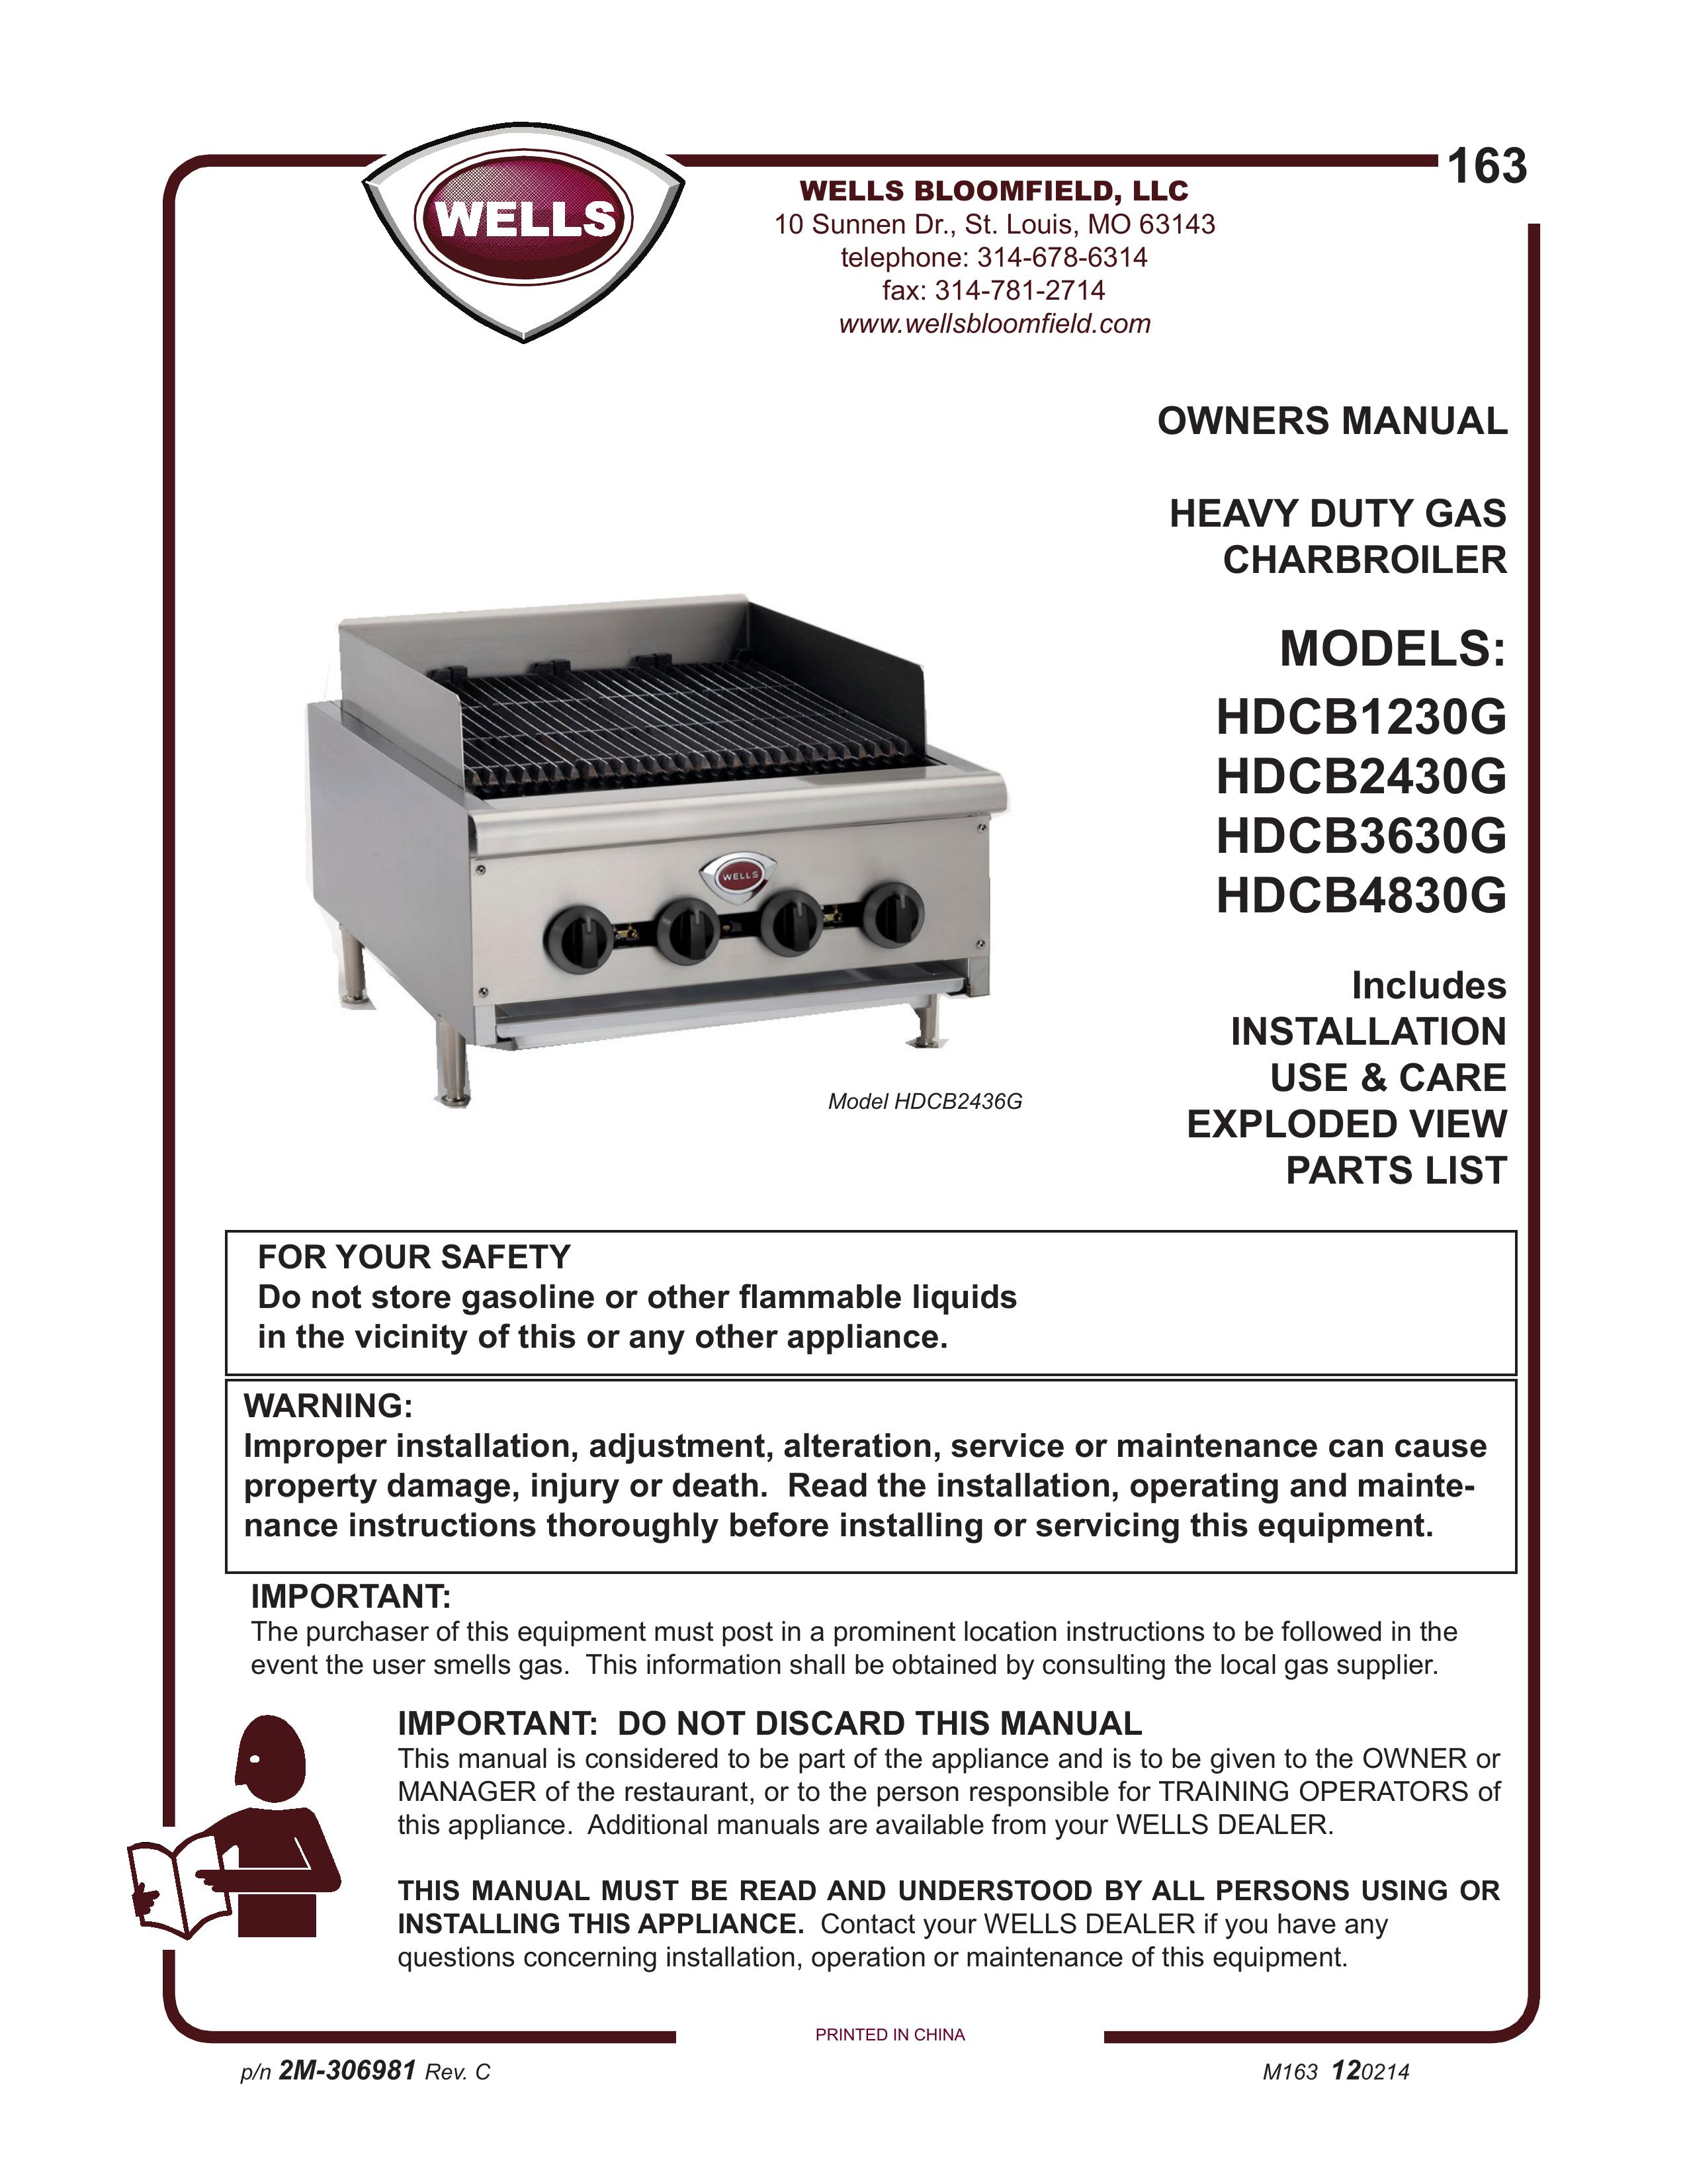 Wells HDCB2430G Charcoal Grill User Manual